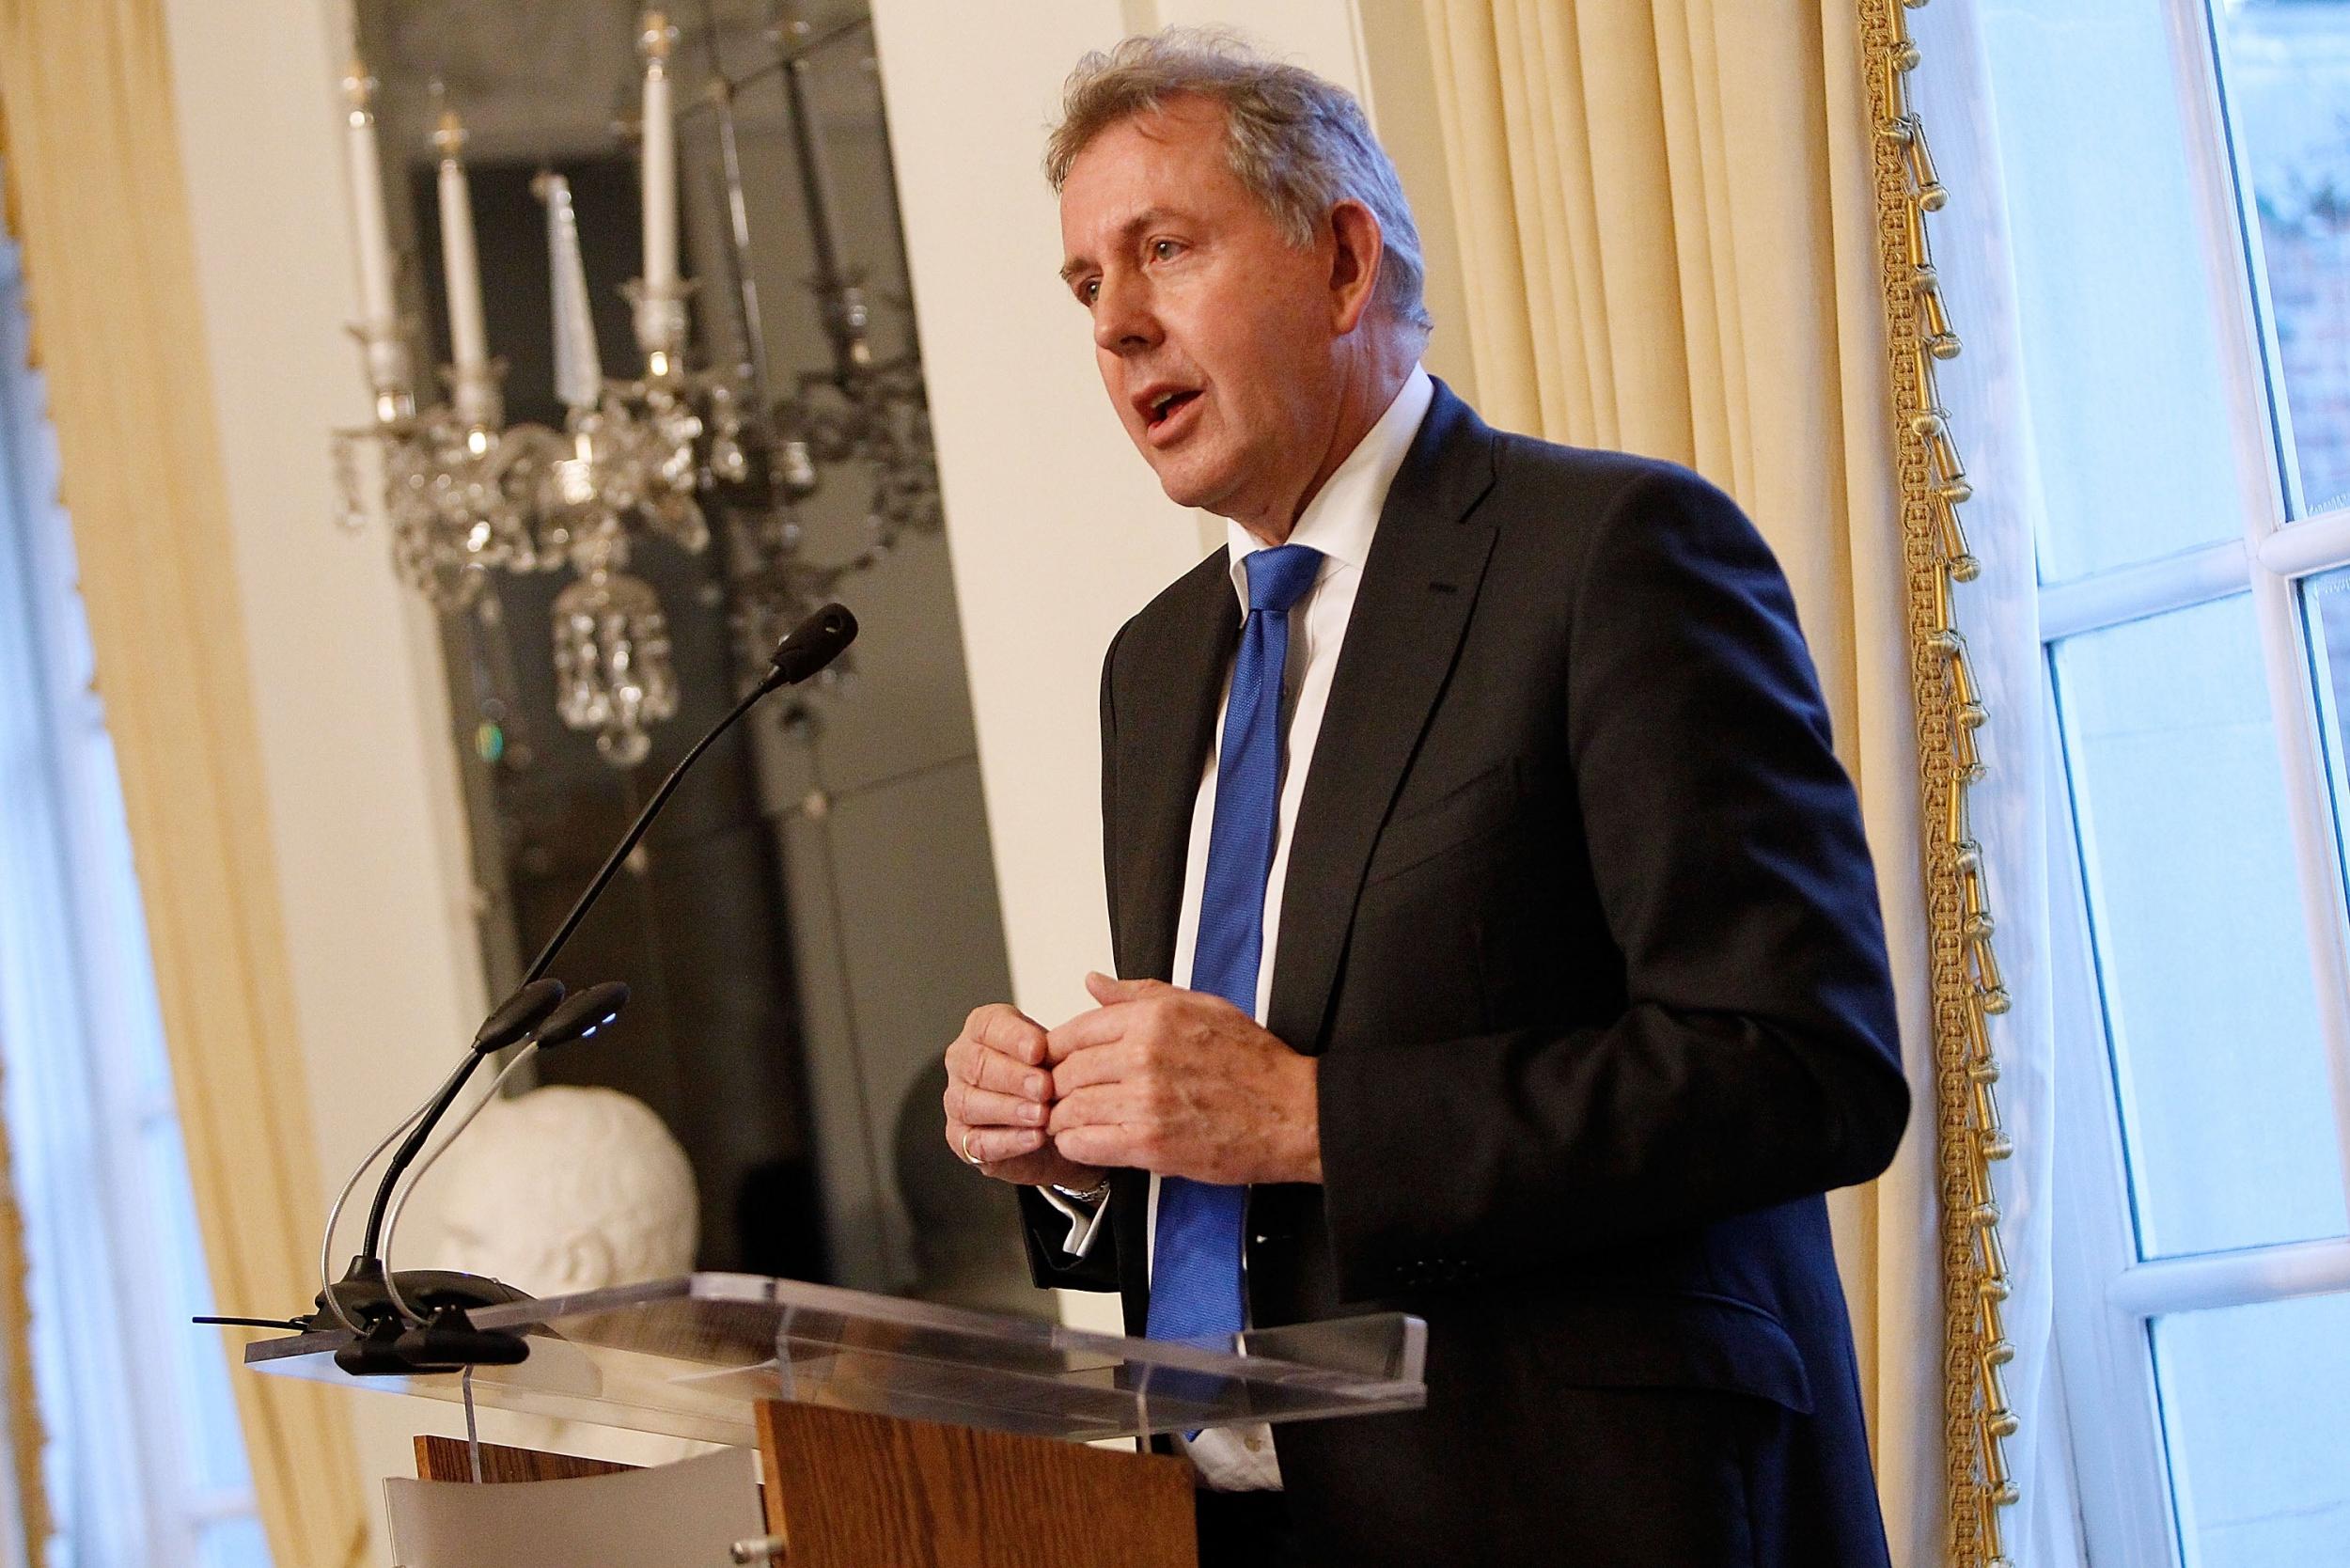 Lord Darroch is a former national security adviser and US ambassador